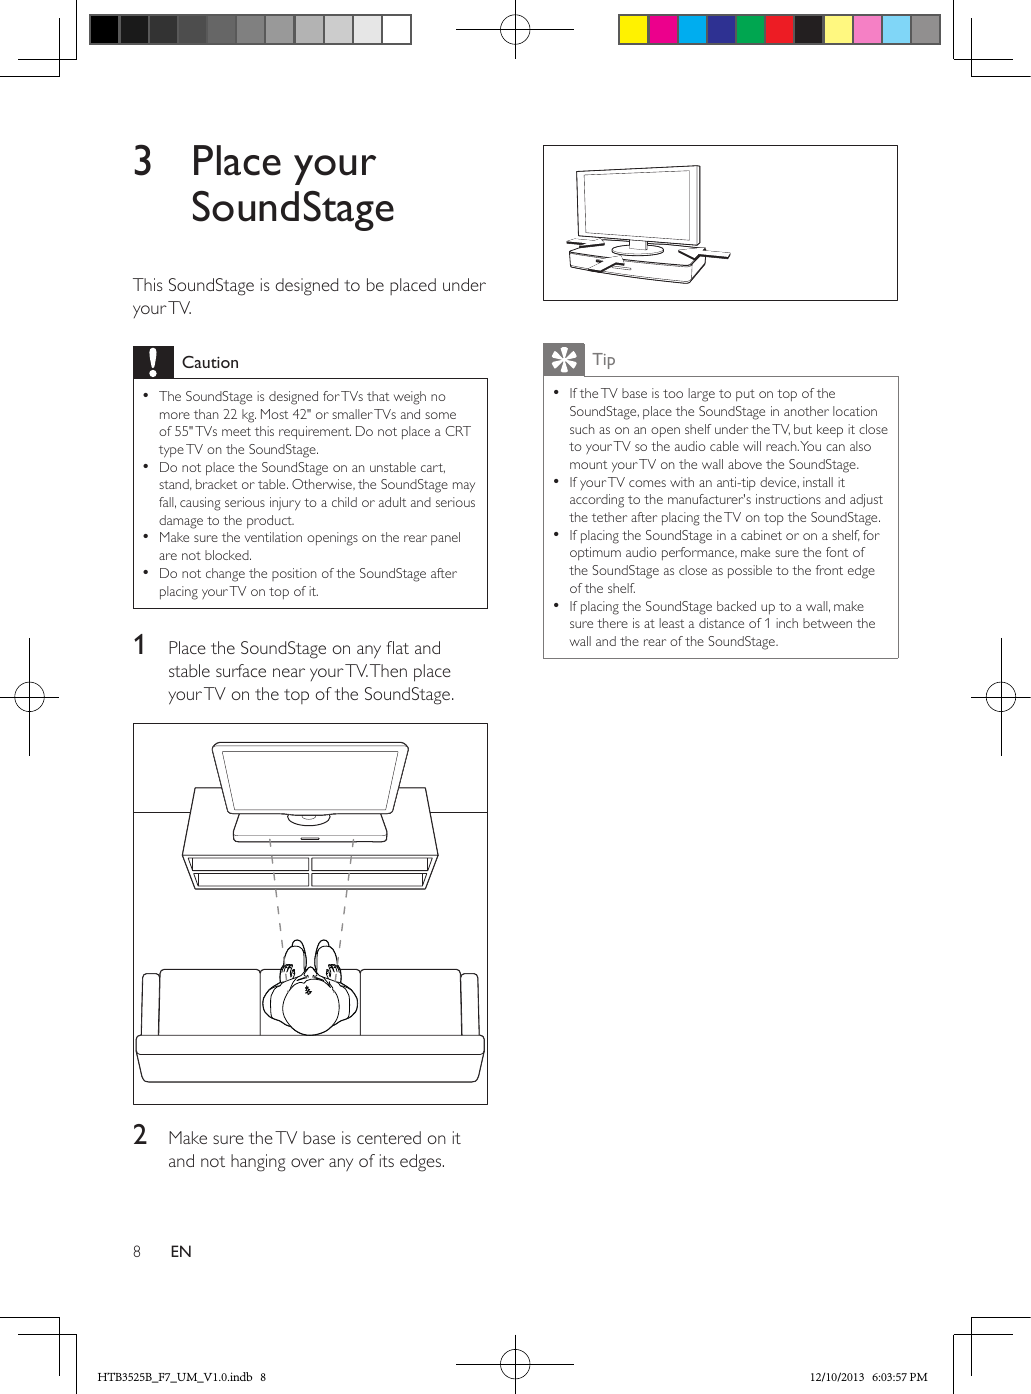 8EN3  Place your SoundStageThis SoundStage is designed to be placed under your TV.Caution • The SoundStage is designed for TVs that weigh no more than 22 kg. Most 42&quot; or smaller TVs and some of 55&quot; TVs meet this requirement. Do not place a CRT type TV on the SoundStage. • Do not place the SoundStage on an unstable cart, stand, bracket or table. Otherwise, the SoundStage may fall, causing serious injury to a child or adult and serious damage to the product. • Make sure the ventilation openings on the rear panel are not blocked. • Do not change the position of the SoundStage after placing your TV on top of it.1  Place the SoundStage on any at and stable surface near your TV. Then place your TV on the top of the SoundStage. 2  Make sure the TV base is centered on it and not hanging over any of its edges. Tip • If the TV base is too large to put on top of the SoundStage, place the SoundStage in another location such as on an open shelf under the TV, but keep it close to your TV so the audio cable will reach. You can also mount your TV on the wall above the SoundStage. • If your TV comes with an anti-tip device, install it according to the manufacturer&apos;s instructions and adjust the tether after placing the TV on top the SoundStage. • If placing the SoundStage in a cabinet or on a shelf, for optimum audio performance, make sure the font of the SoundStage as close as possible to the front edge of the shelf. • If placing the SoundStage backed up to a wall, make sure there is at least a distance of 1 inch between the wall and the rear of the SoundStage.HTB3525B_F7_UM_V1.0.indb   8 12/10/2013   6:03:57 PM